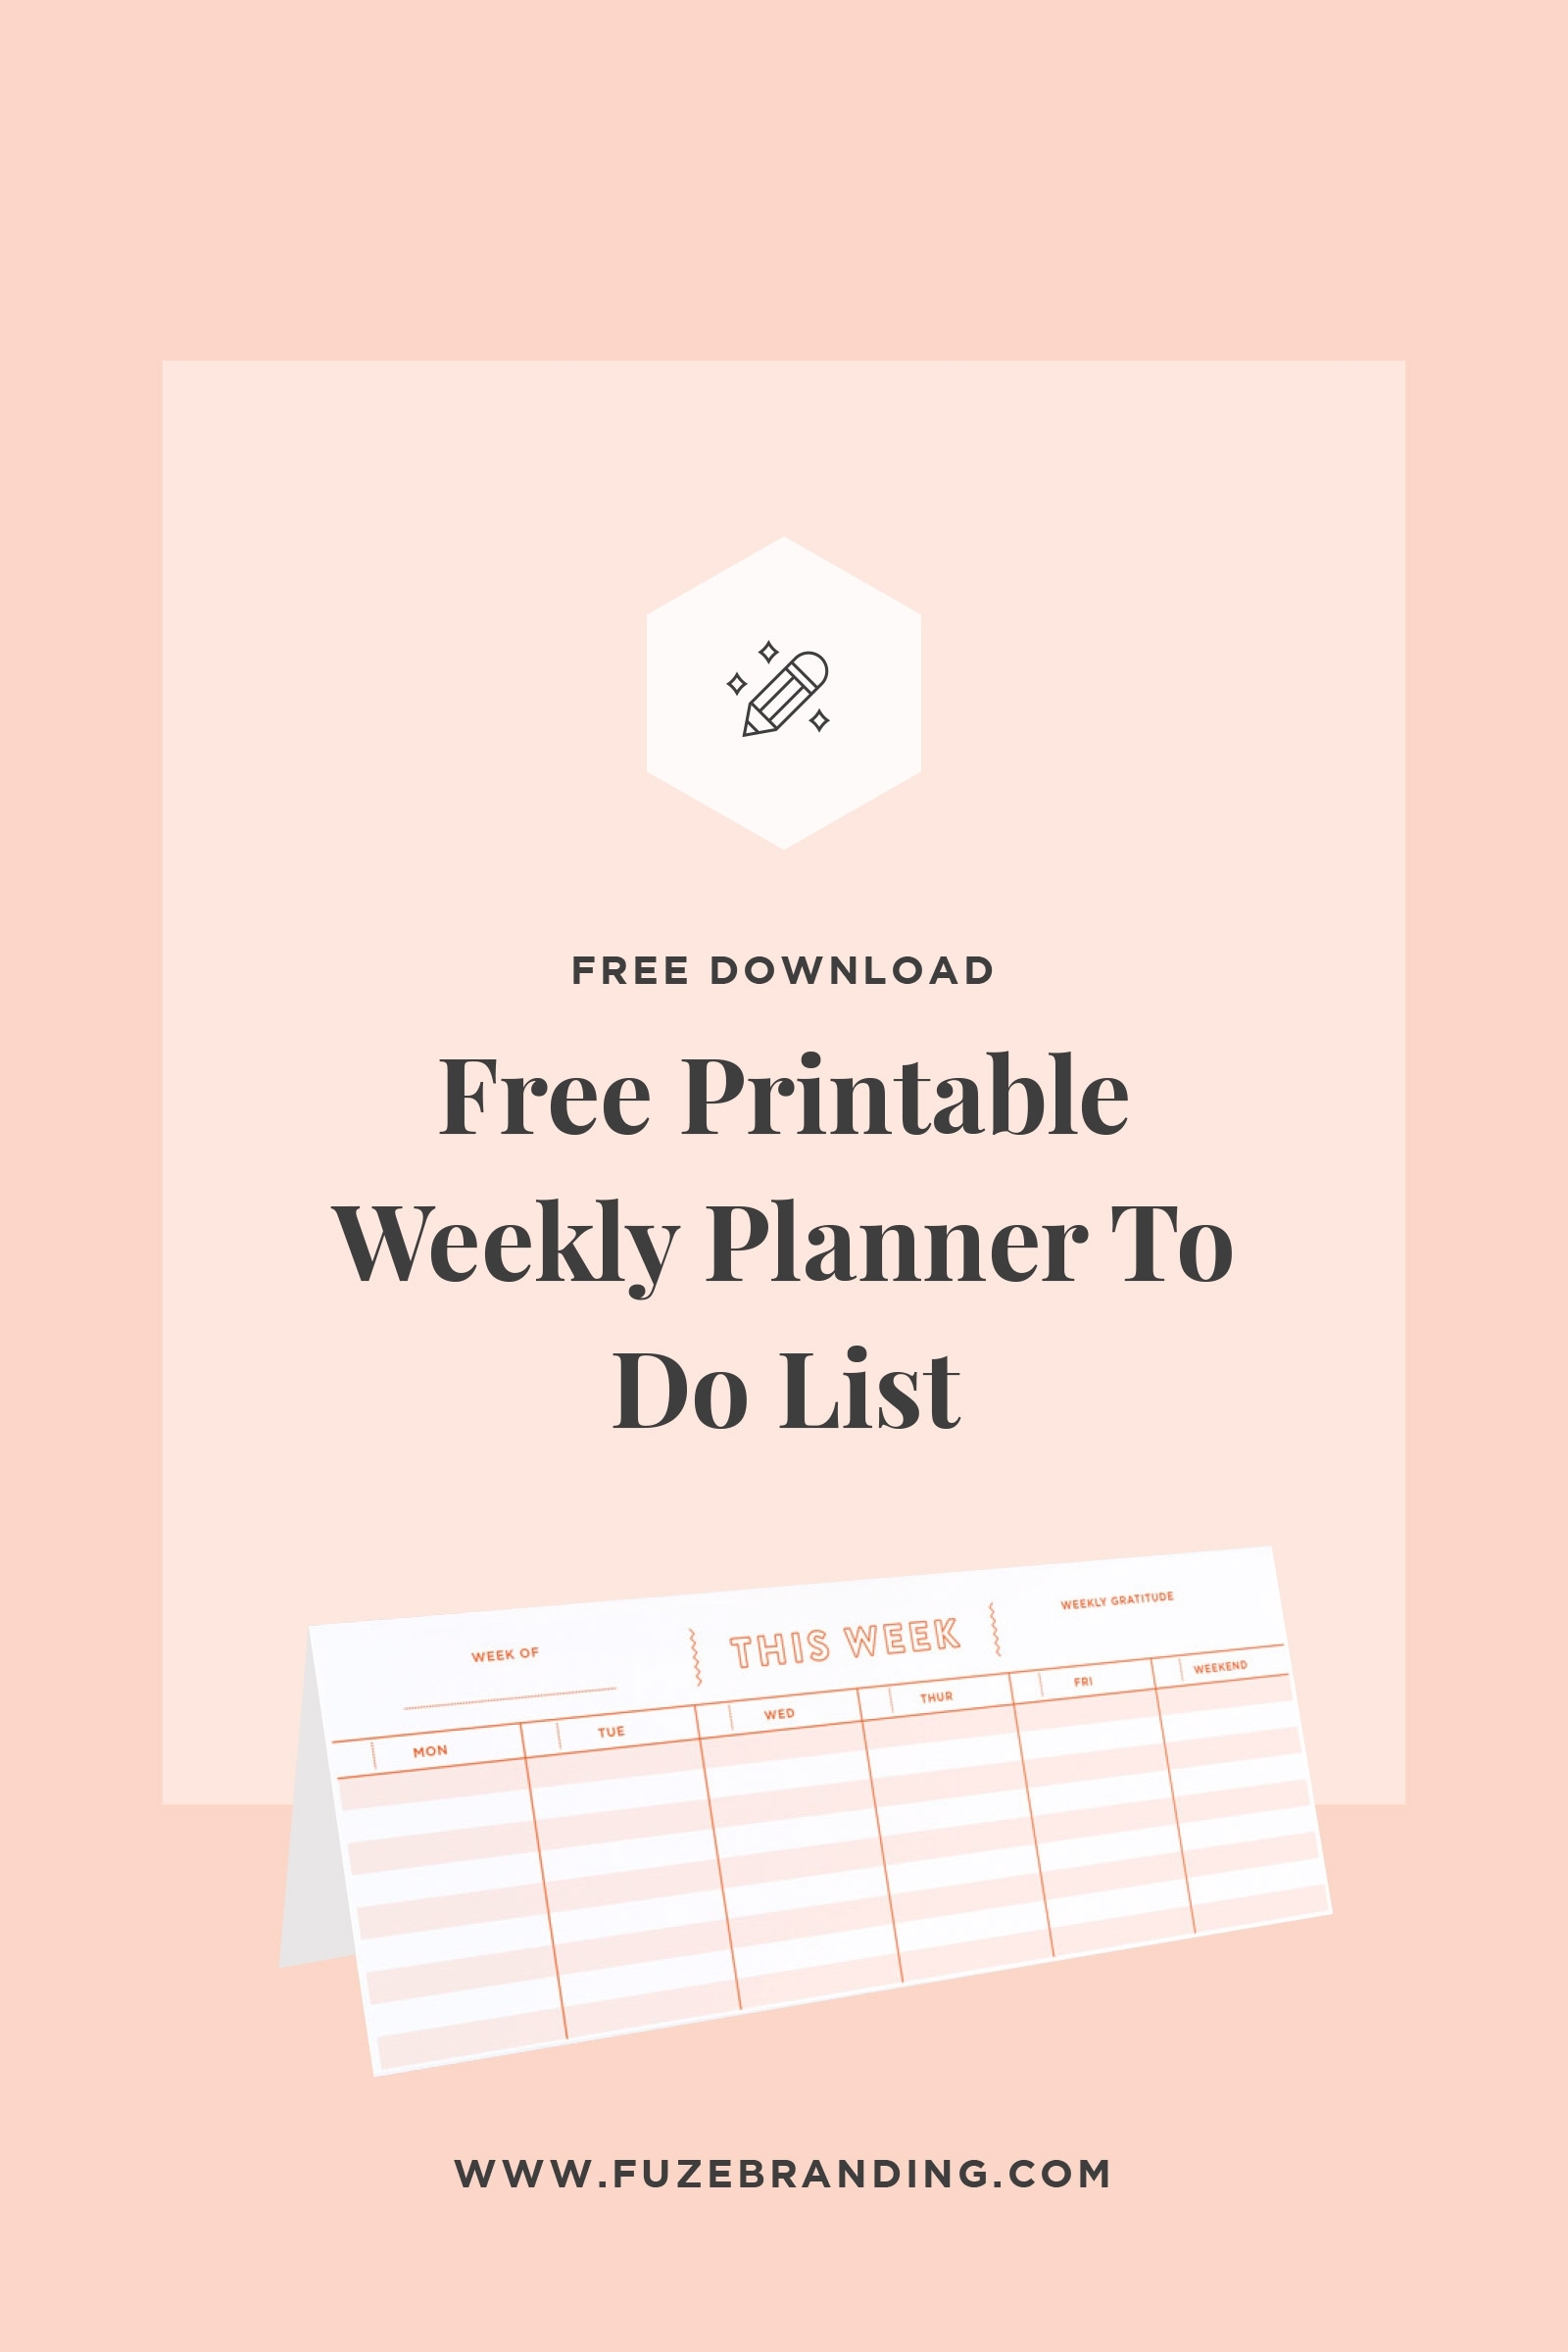 Fuze Branding - Free Printable Weekly Planner For Small Business throughout A Peek At The Week Free Printable Weekly Planner